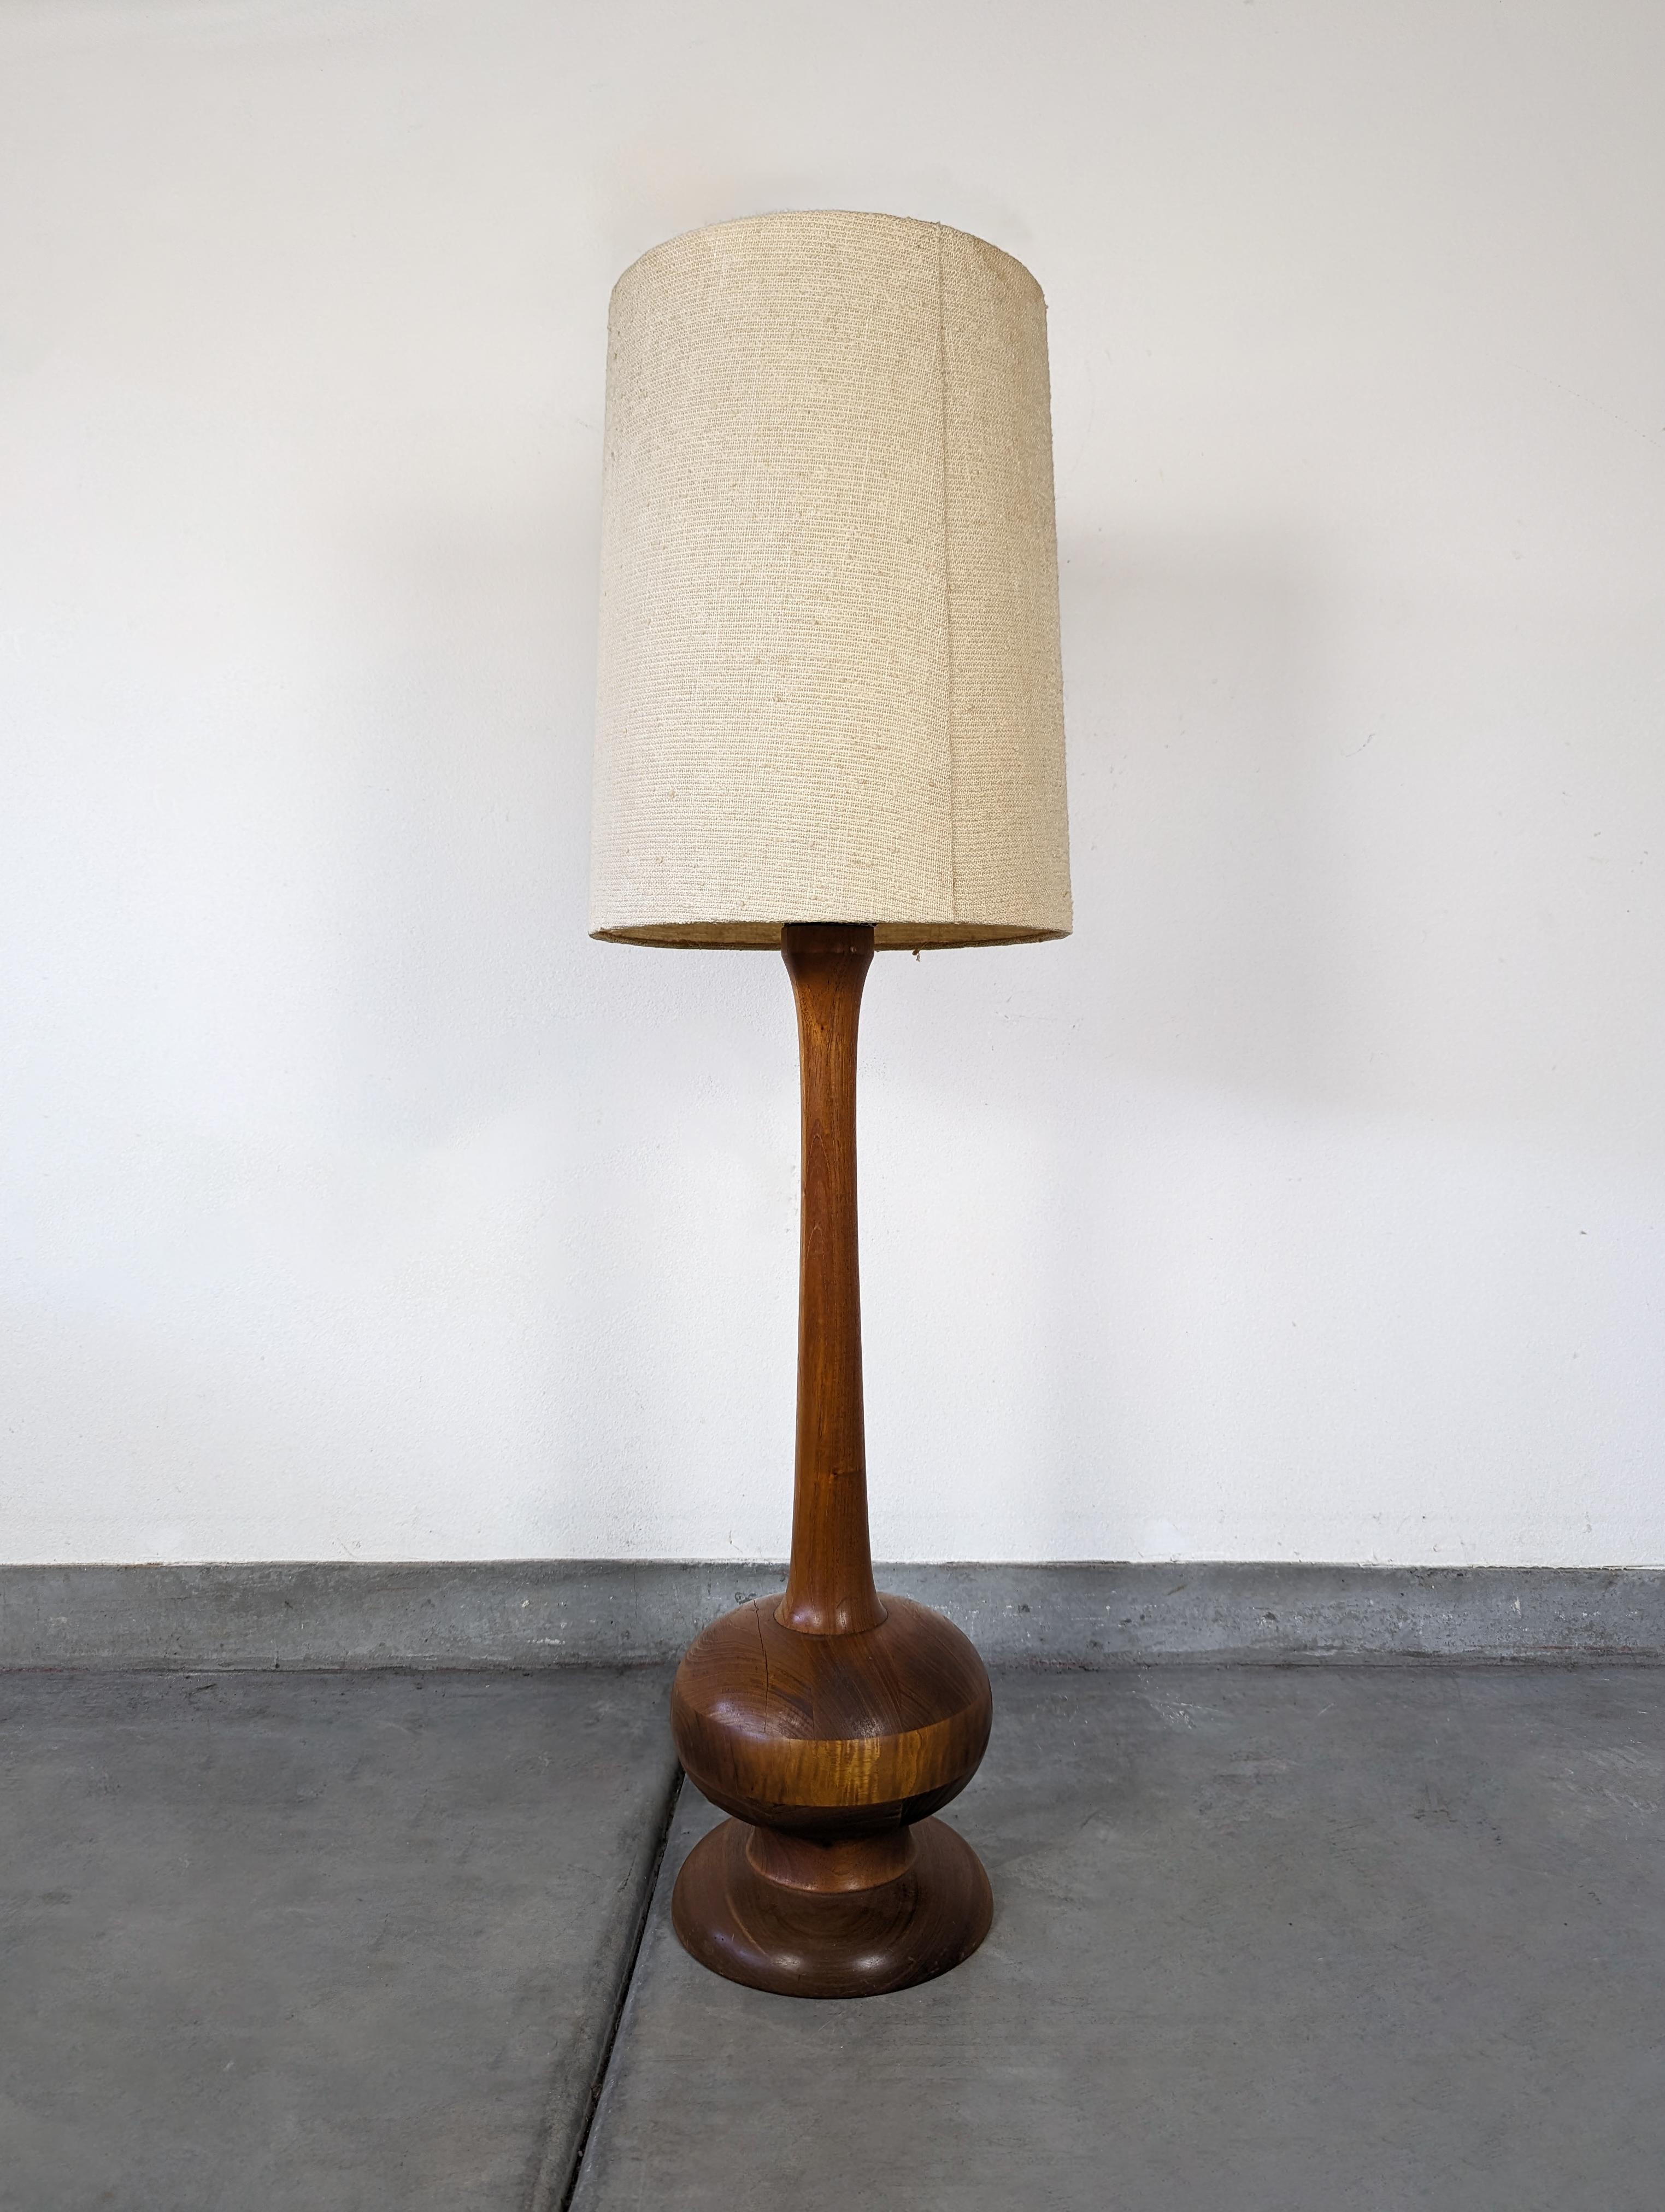 Step back in time with this stunning Mid-Century Modern floor lamp. Crafted from solid wood and featuring a beautiful walnut finish, this piece is a testament to the distinctive style and quality craftsmanship of the mid-20th century. 

The lamp